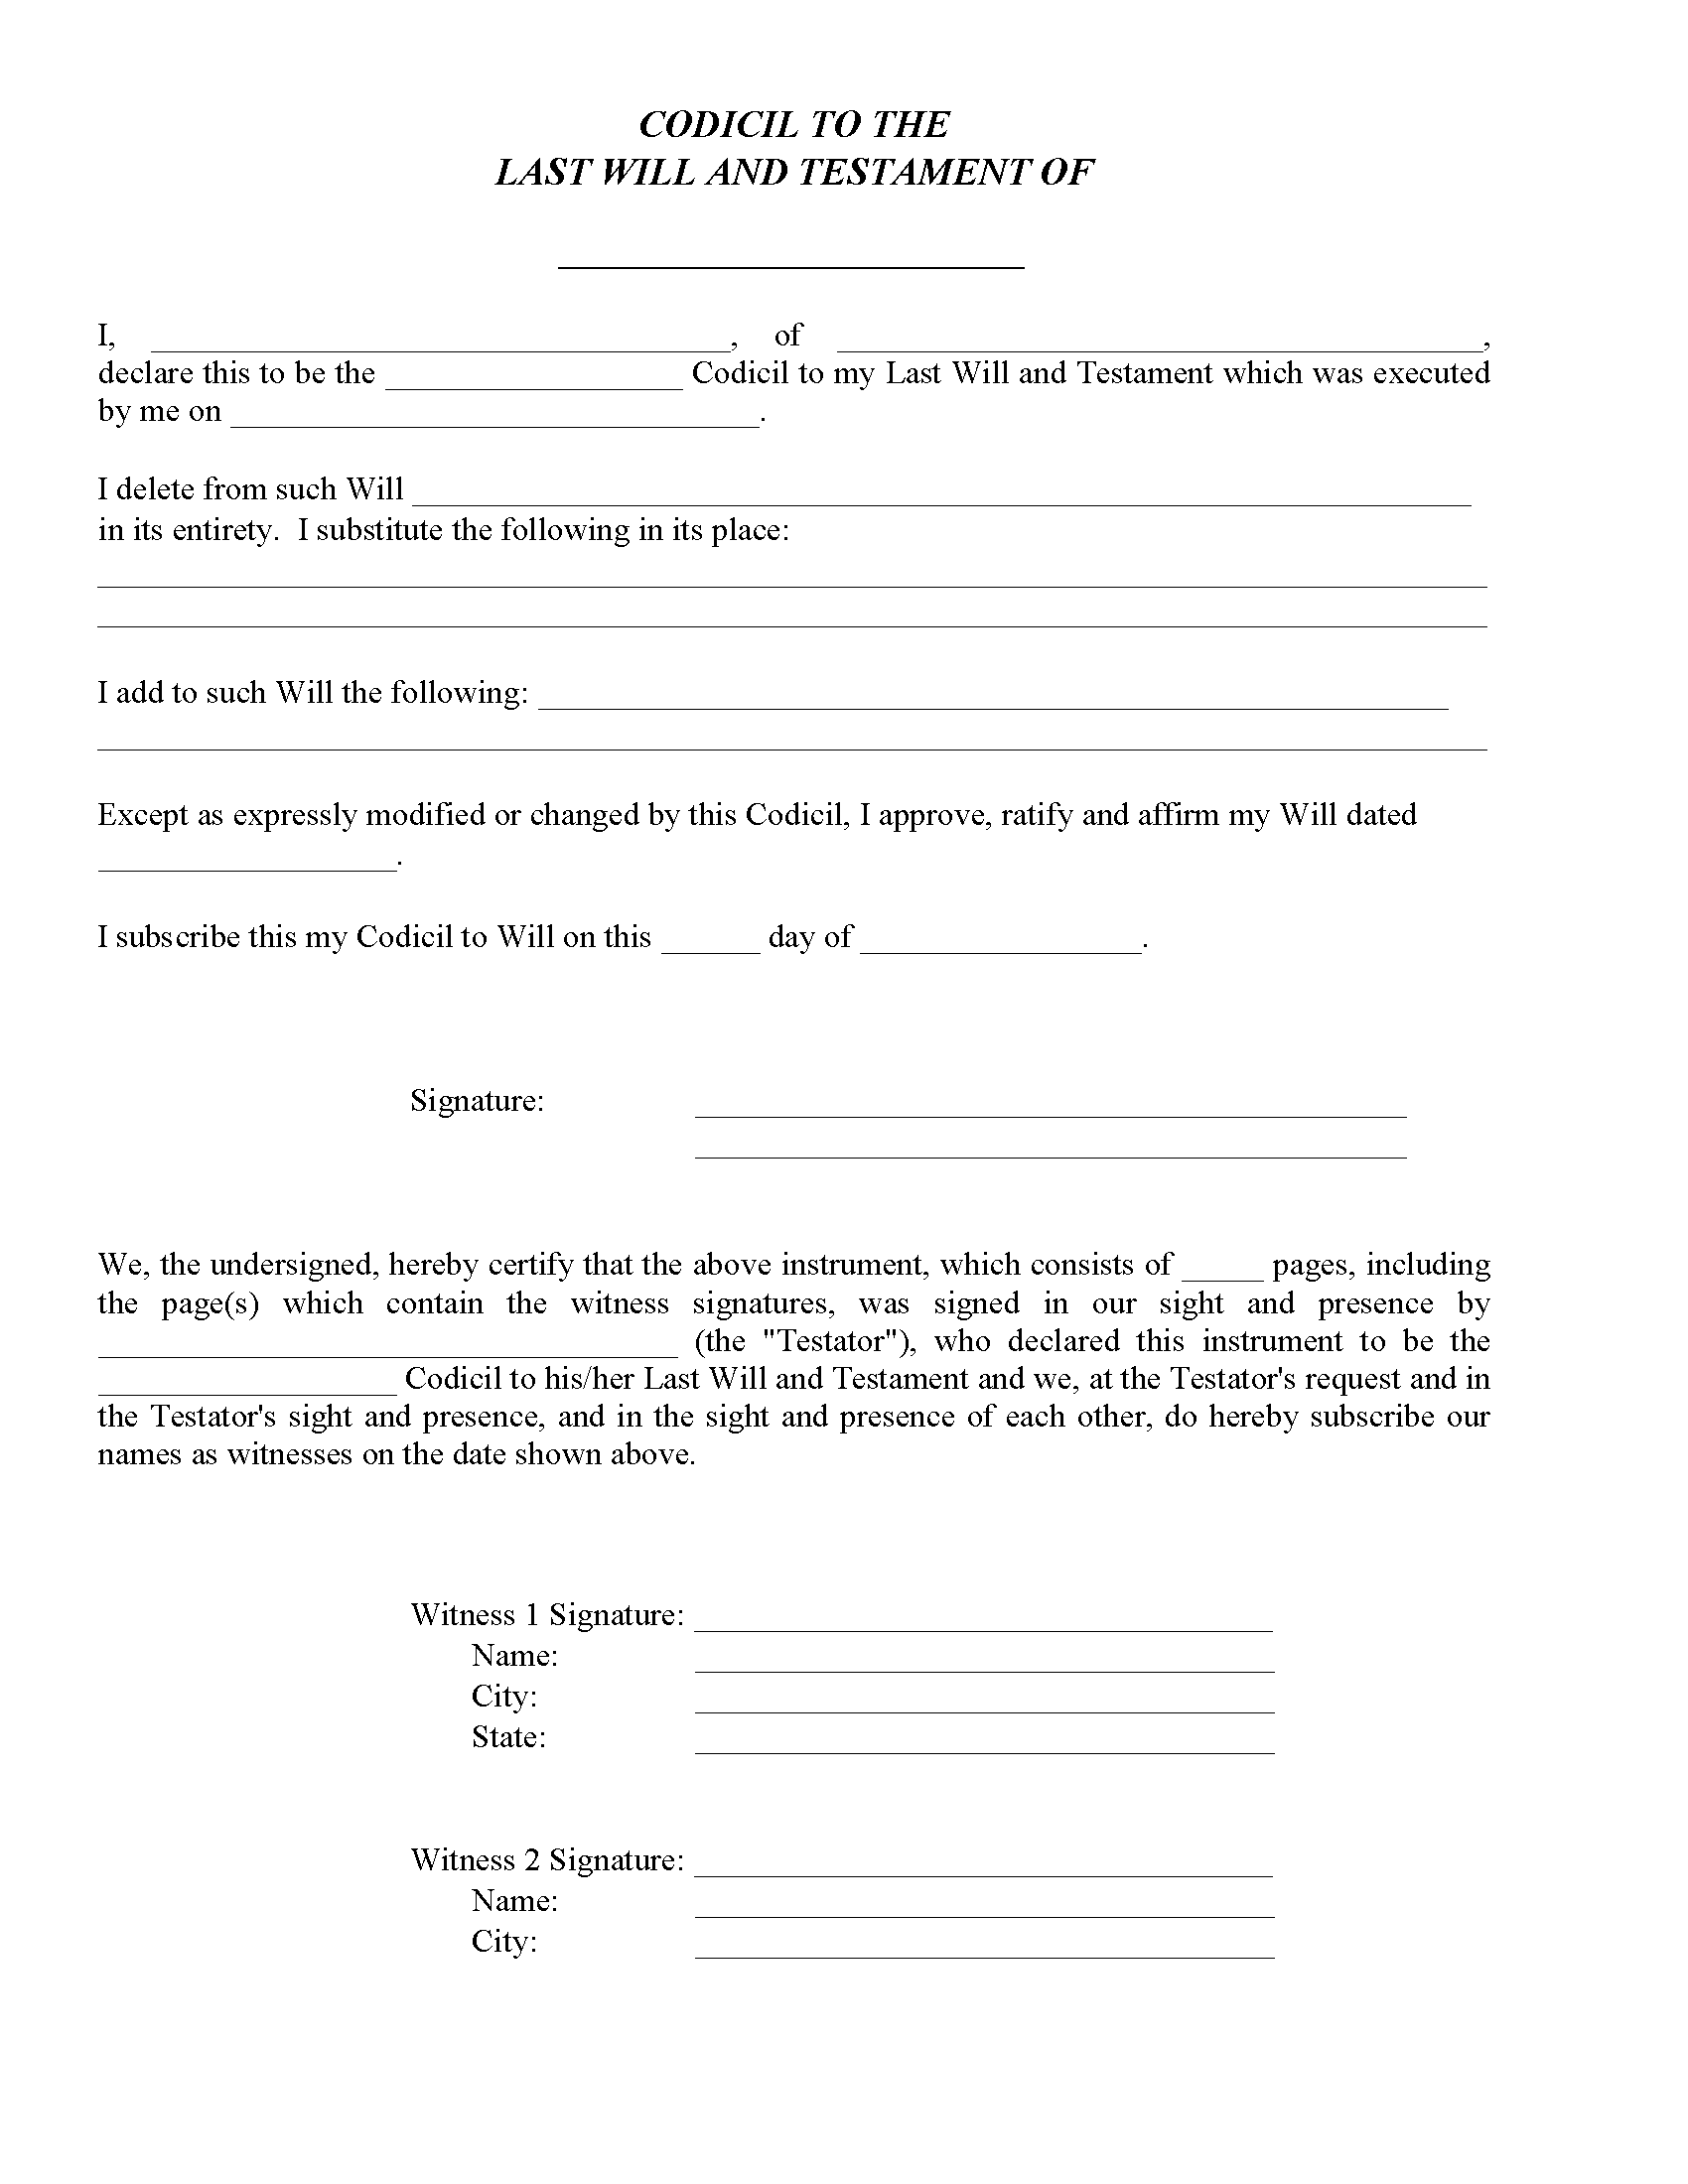 illinois-codicil-to-will-form-free-printable-legal-forms